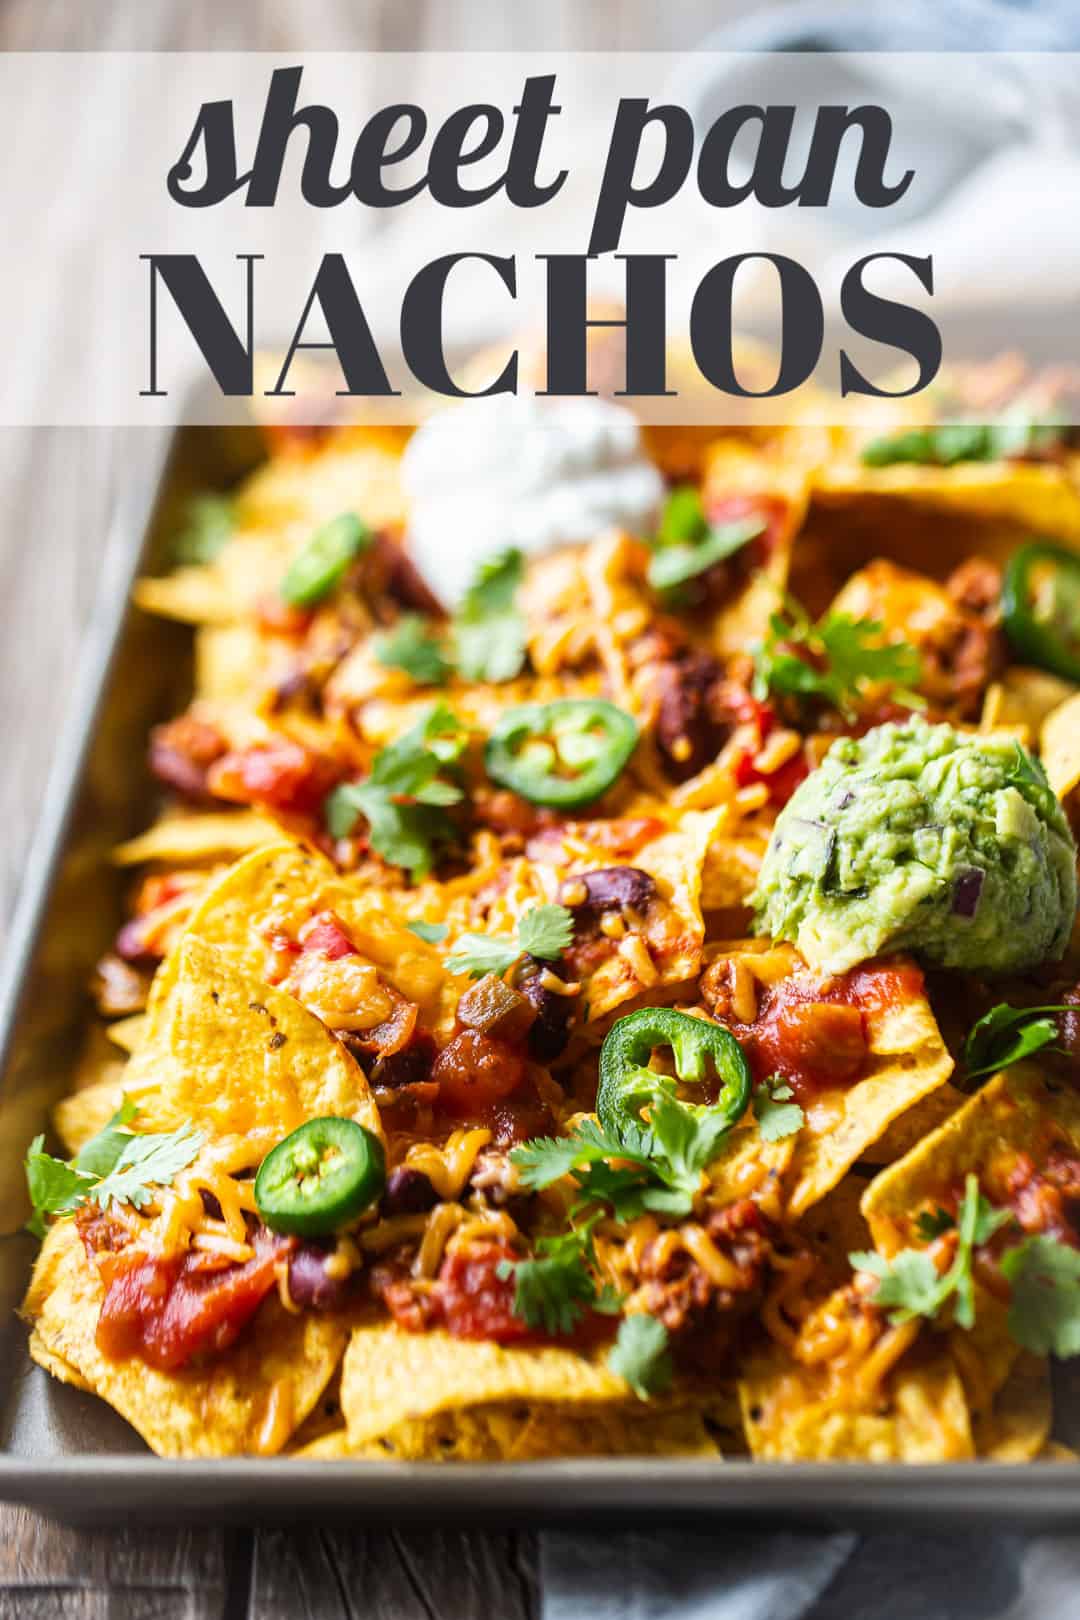 Nachos recipe, prepared on a sheet pan, with a text overlay above that reads "Sheet Pan Nachos."